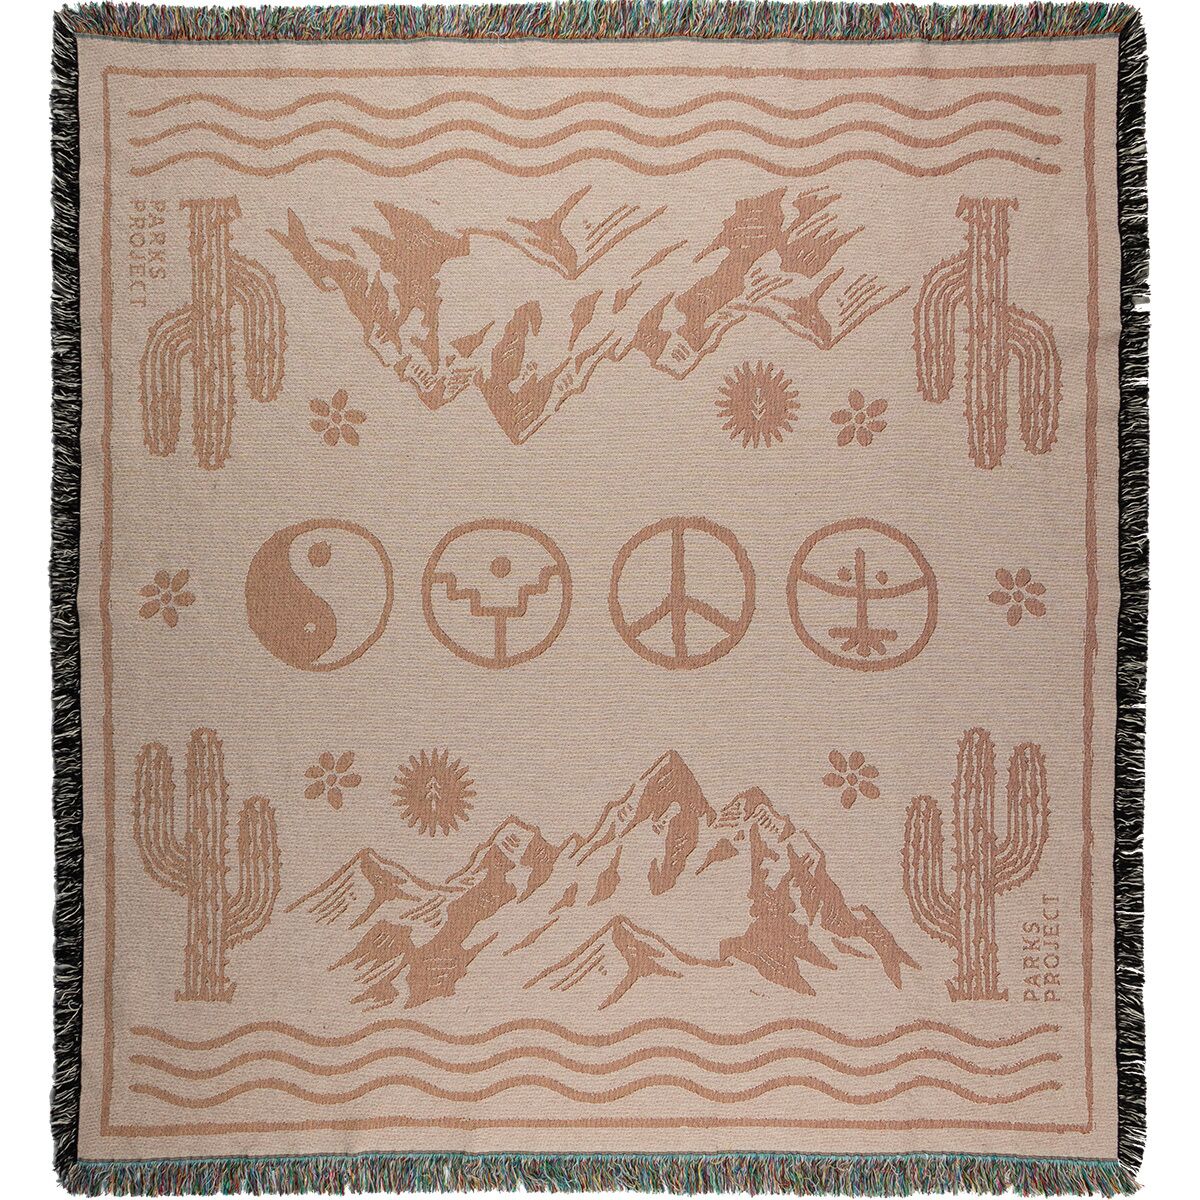 Parks Project Beyond The Valley Woven Blanket